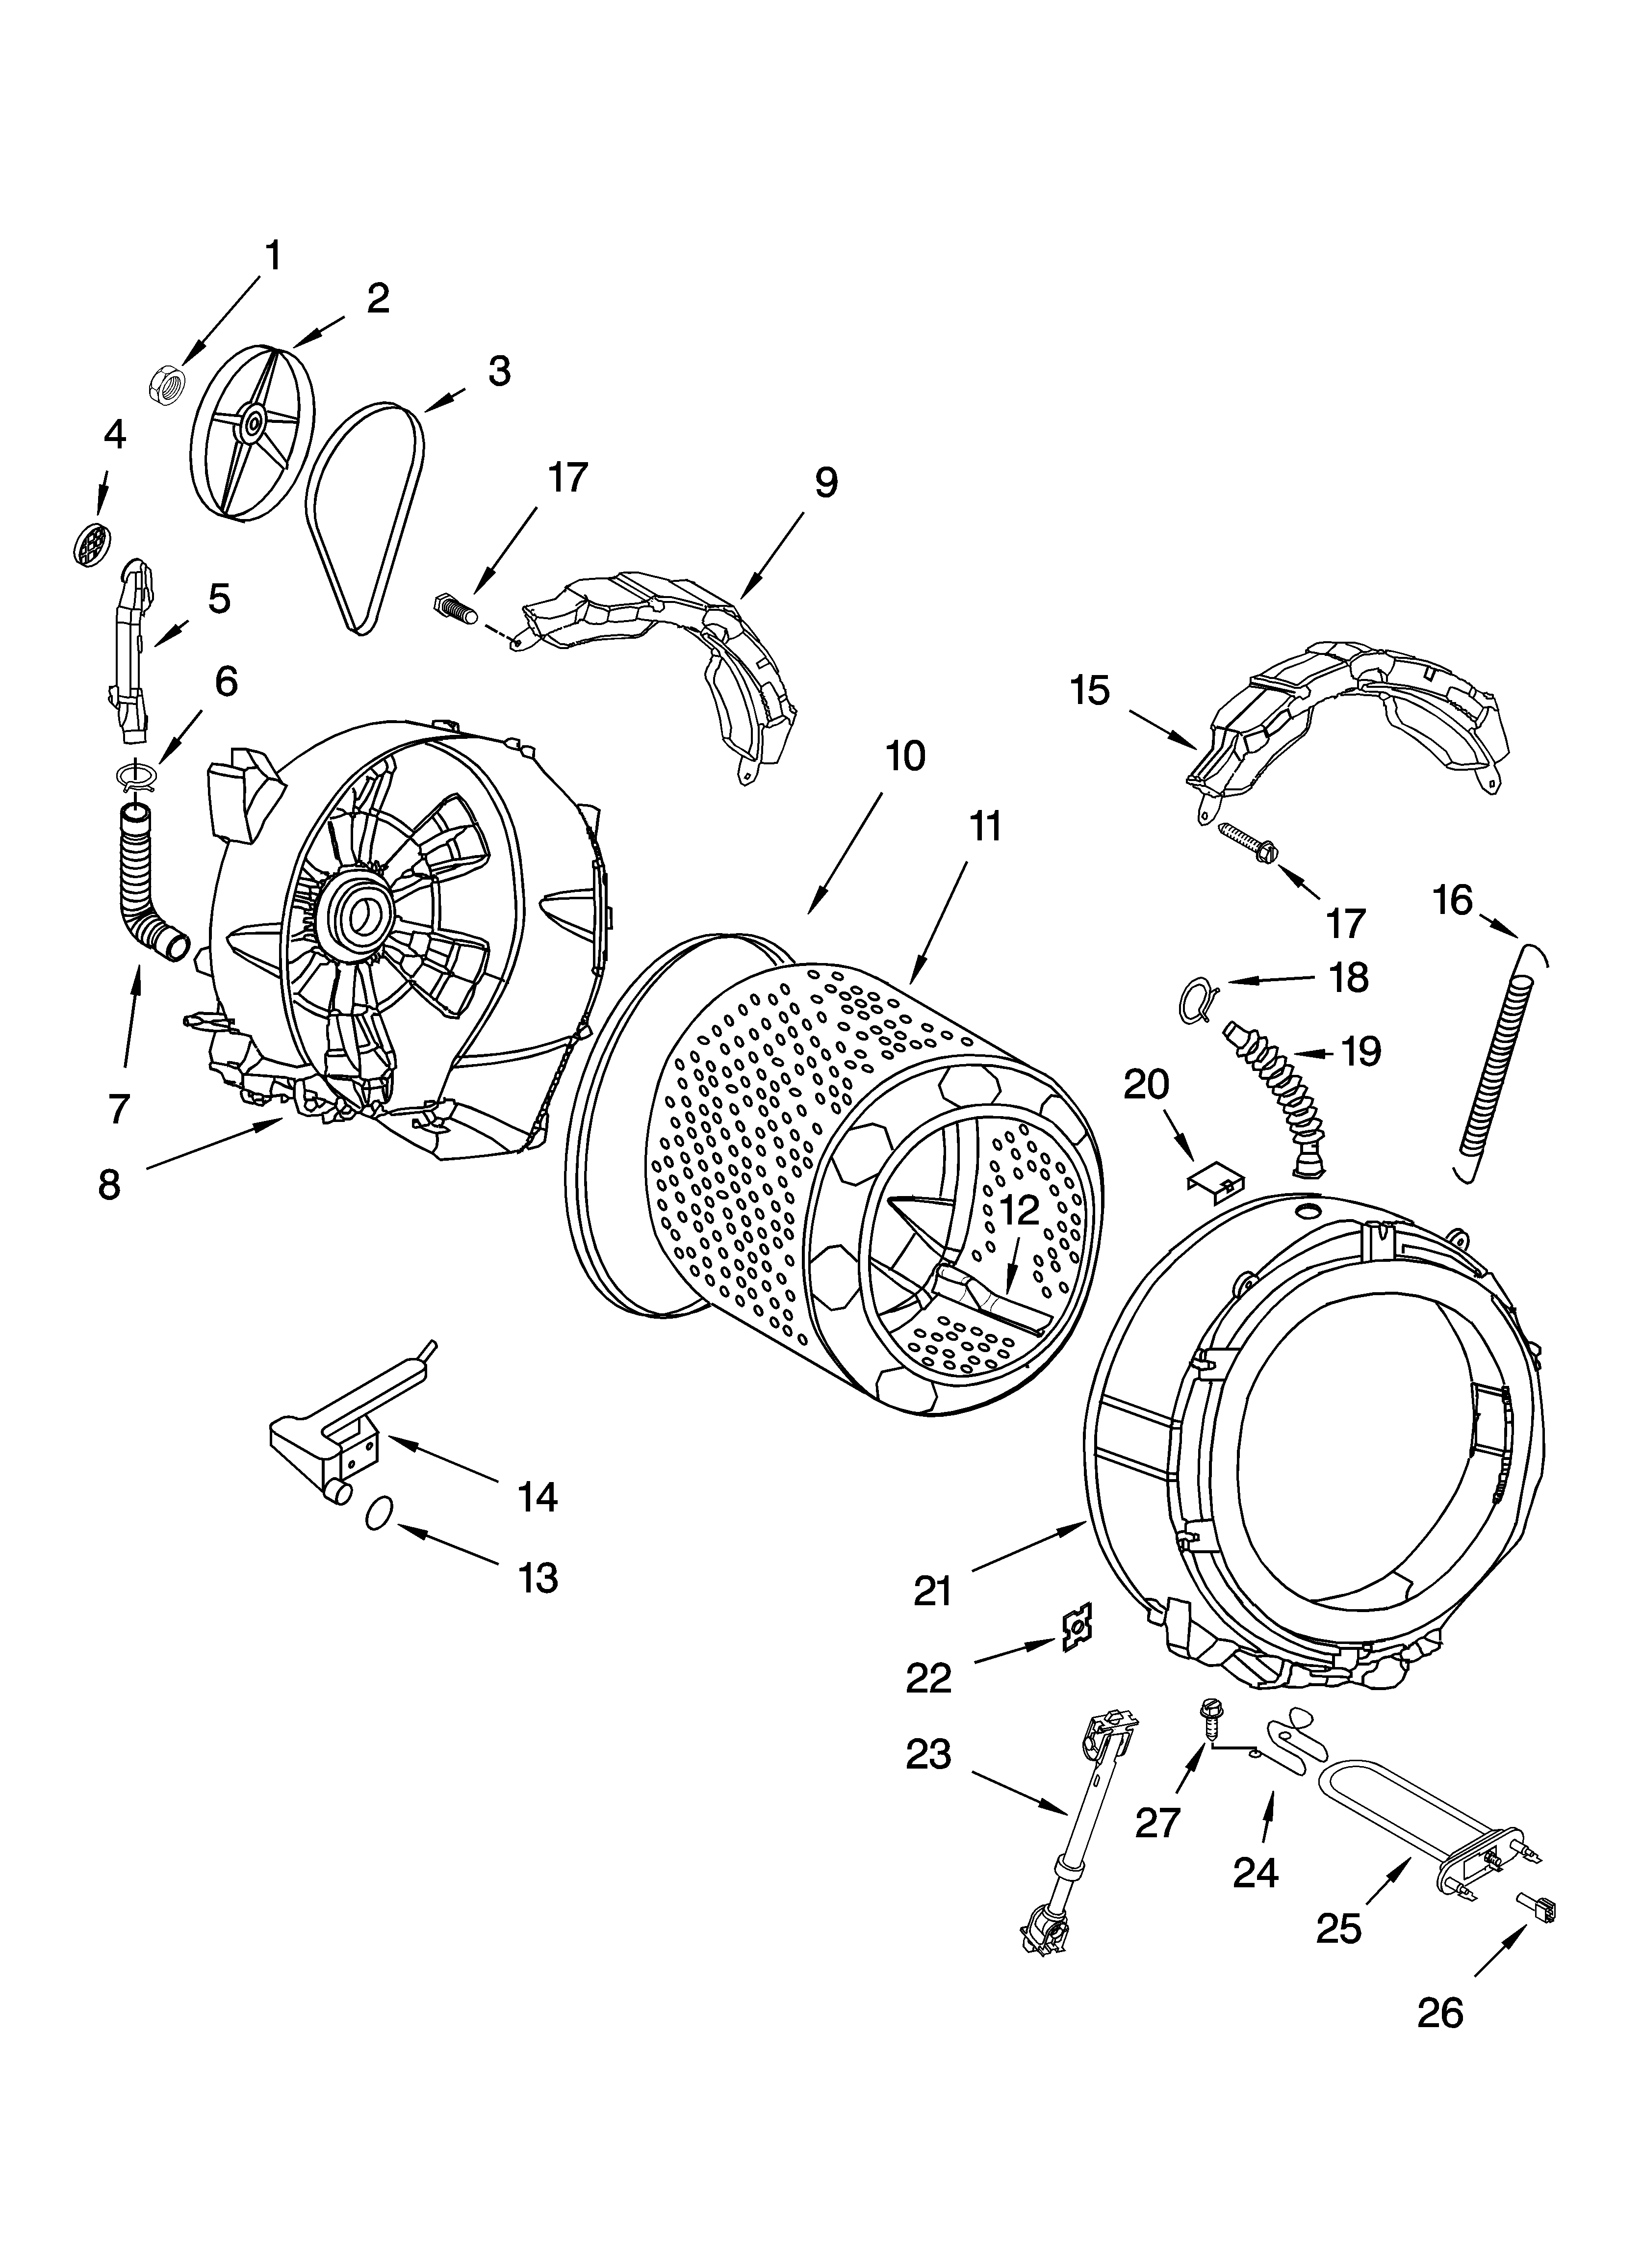 kenmore he4t washer parts diagram